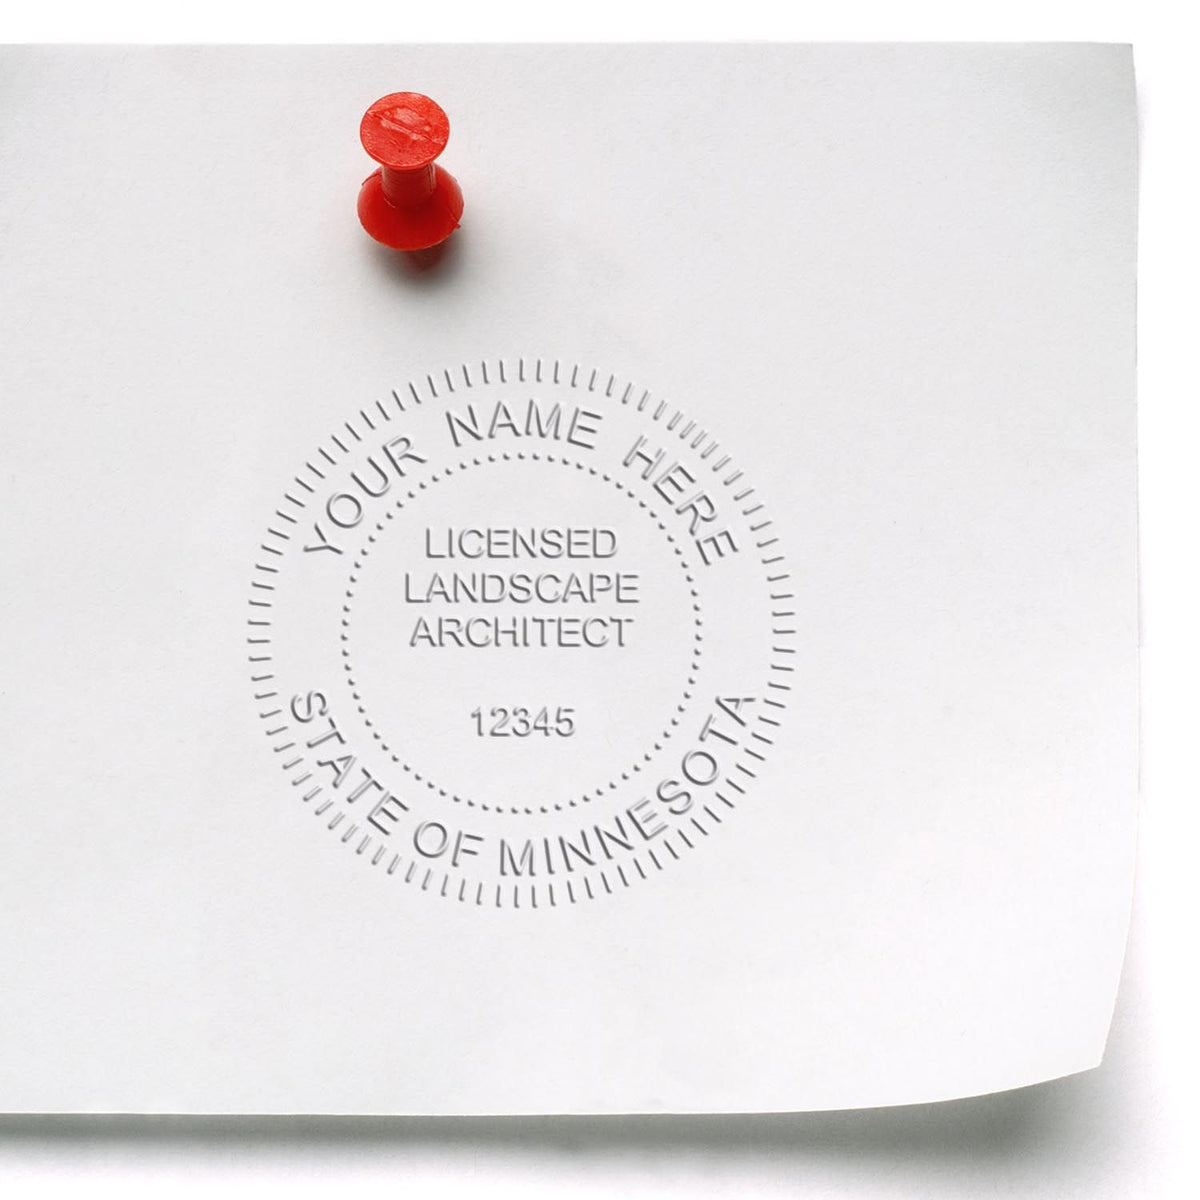 An alternative view of the Hybrid Minnesota Landscape Architect Seal stamped on a sheet of paper showing the image in use